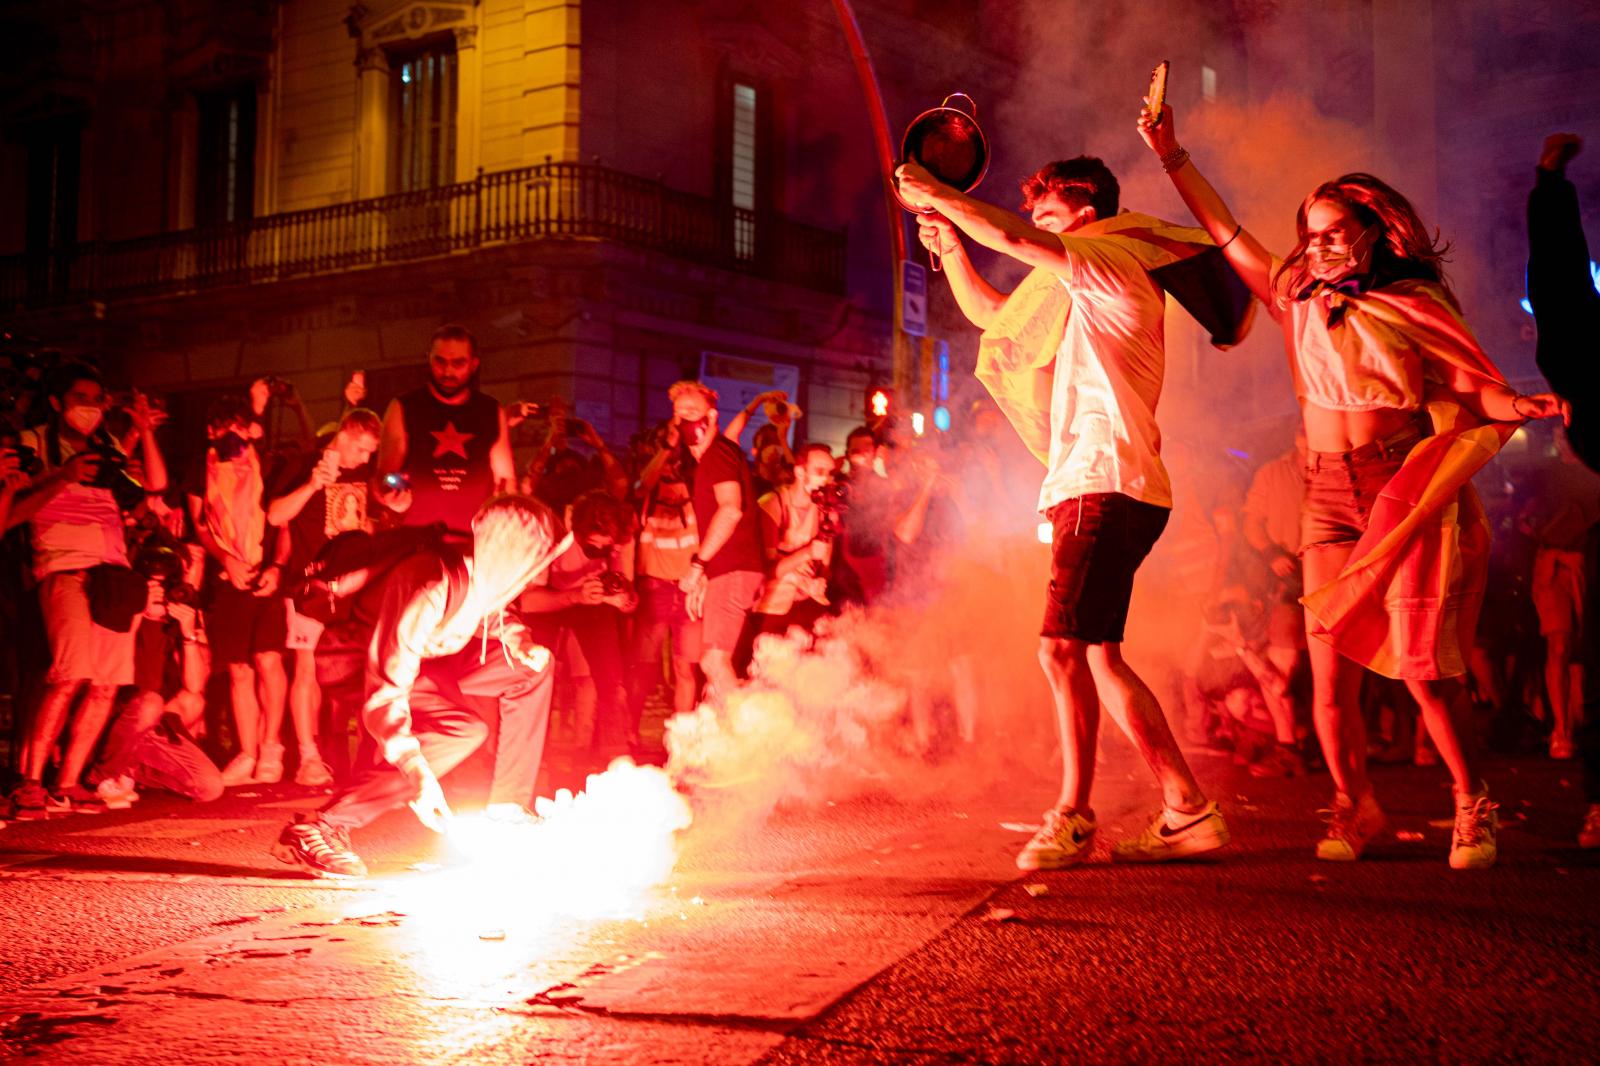 Image from Daily News - Catalans protests in front of the police headquarters...